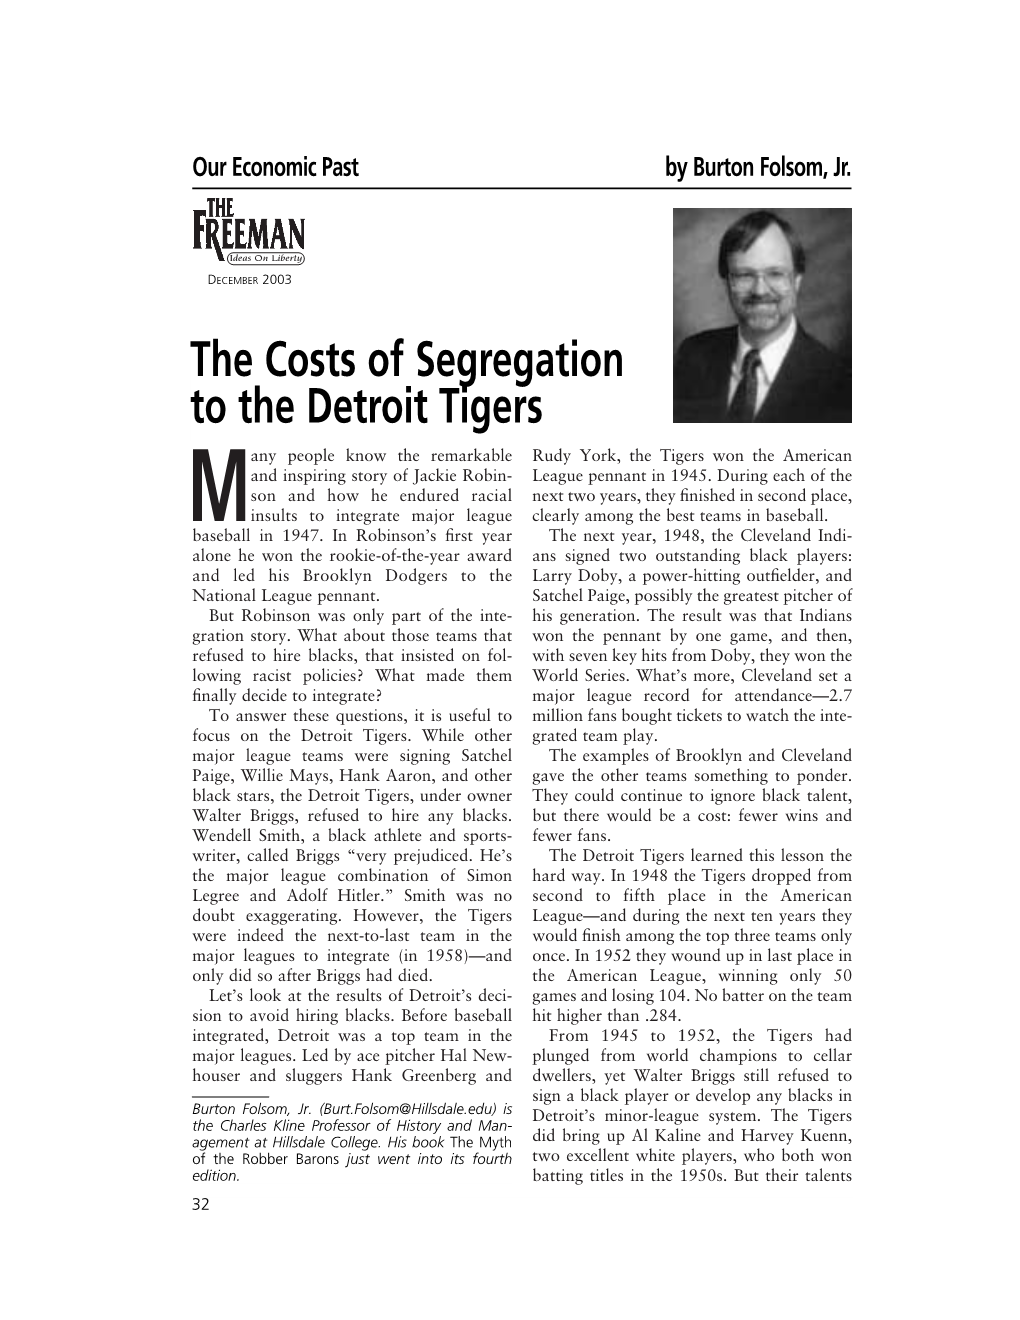 The Costs of Segregation to the Detroit Tigers